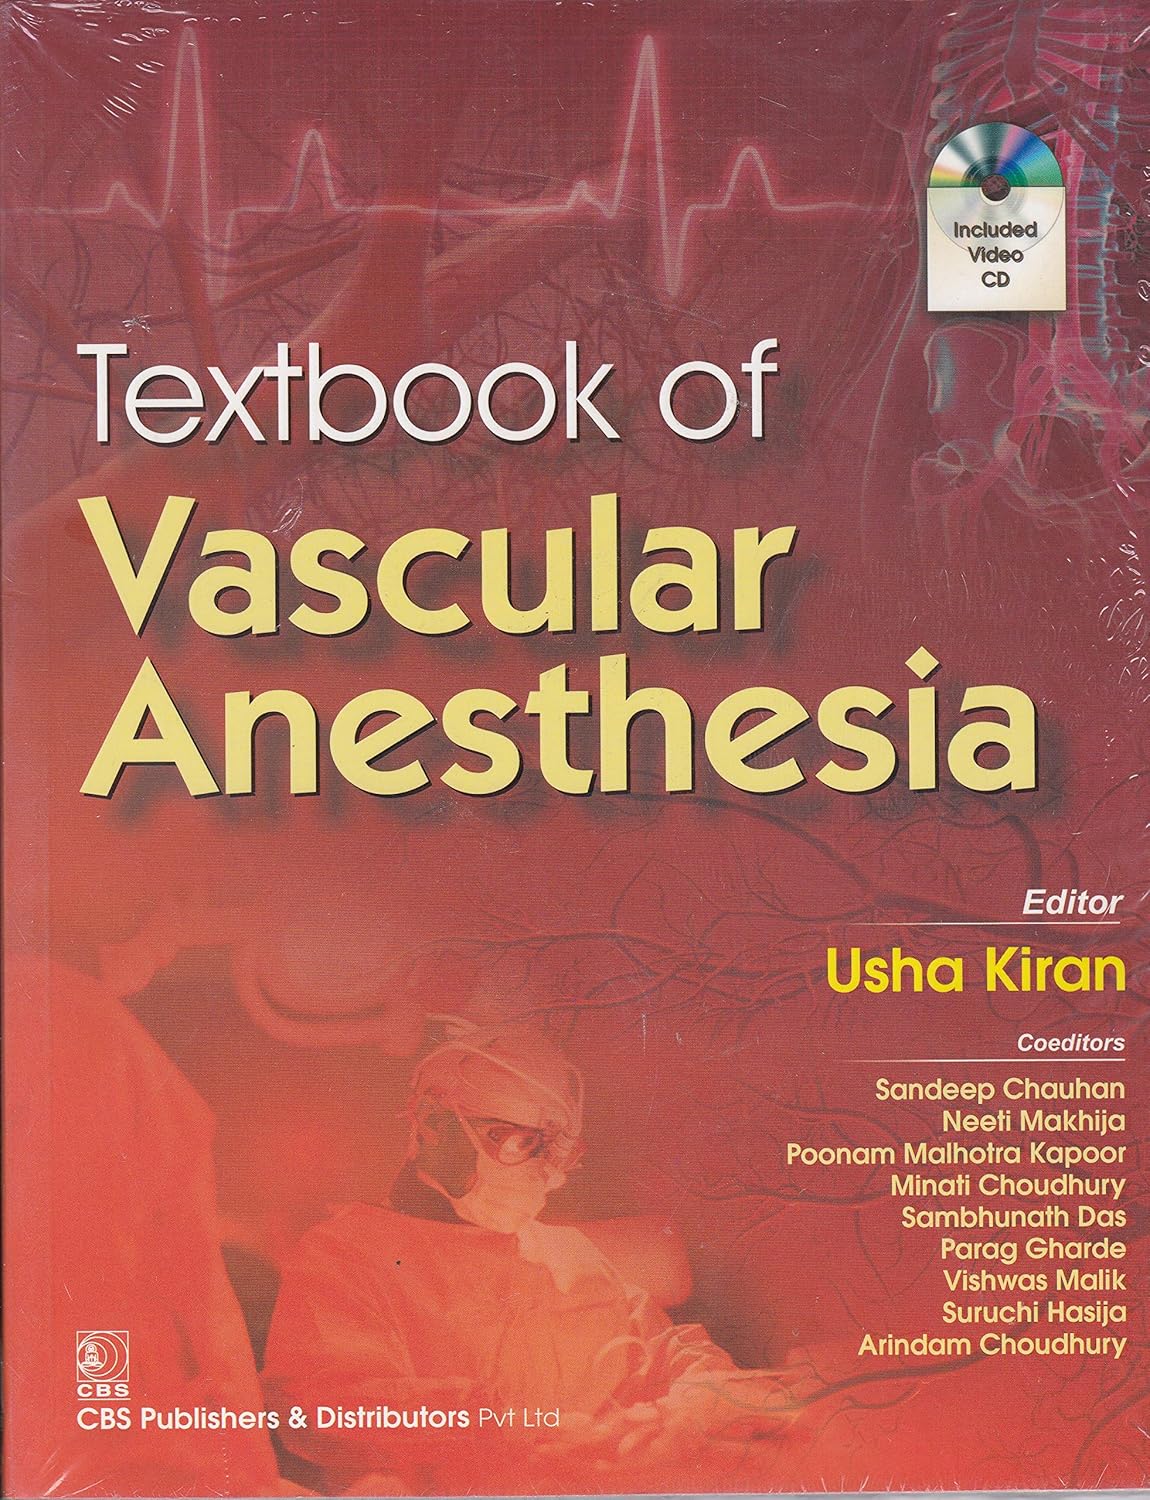 Kiran U Textbook Of Vascular Anesthesia Included Video Cd 